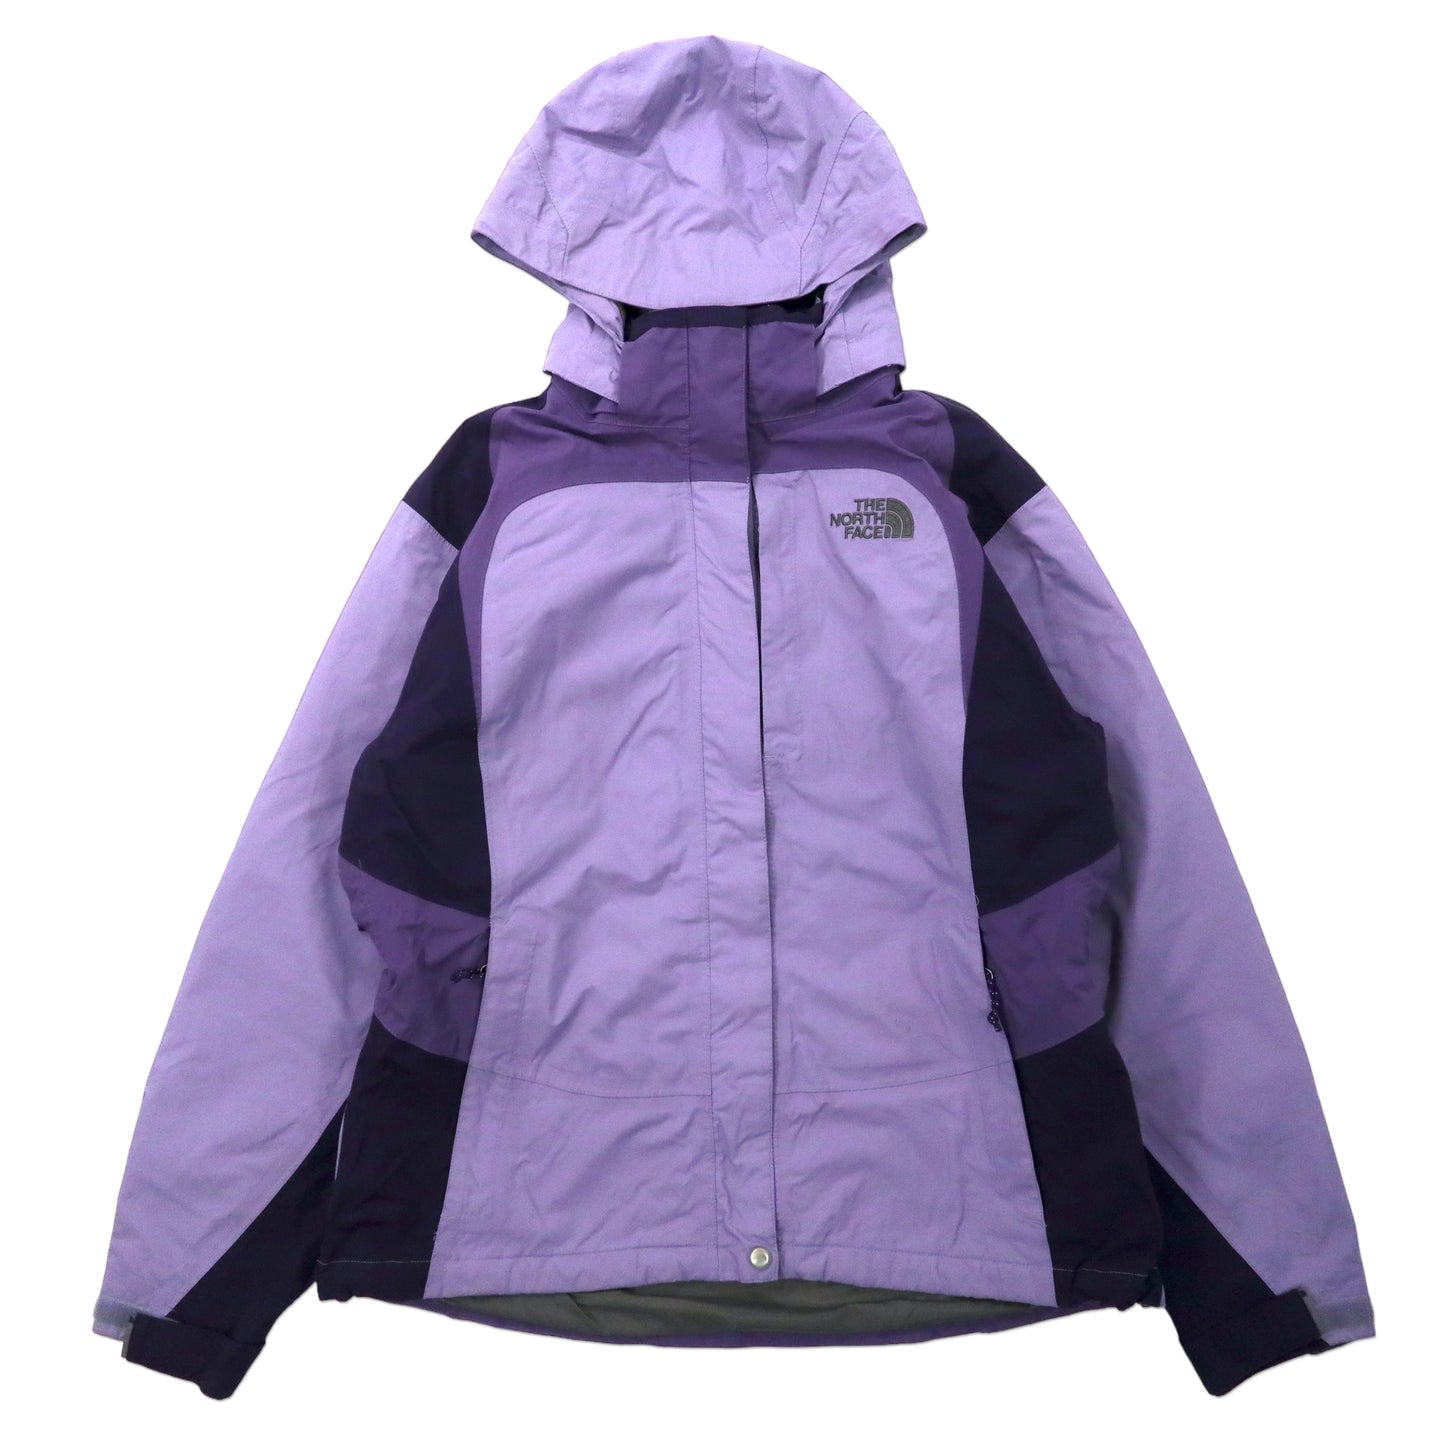 THE NORTH FACE Mountain HOODIE L Purple Nylon HYVENT Waterproof and Hreated  Zip Insip – 日本然リトテ